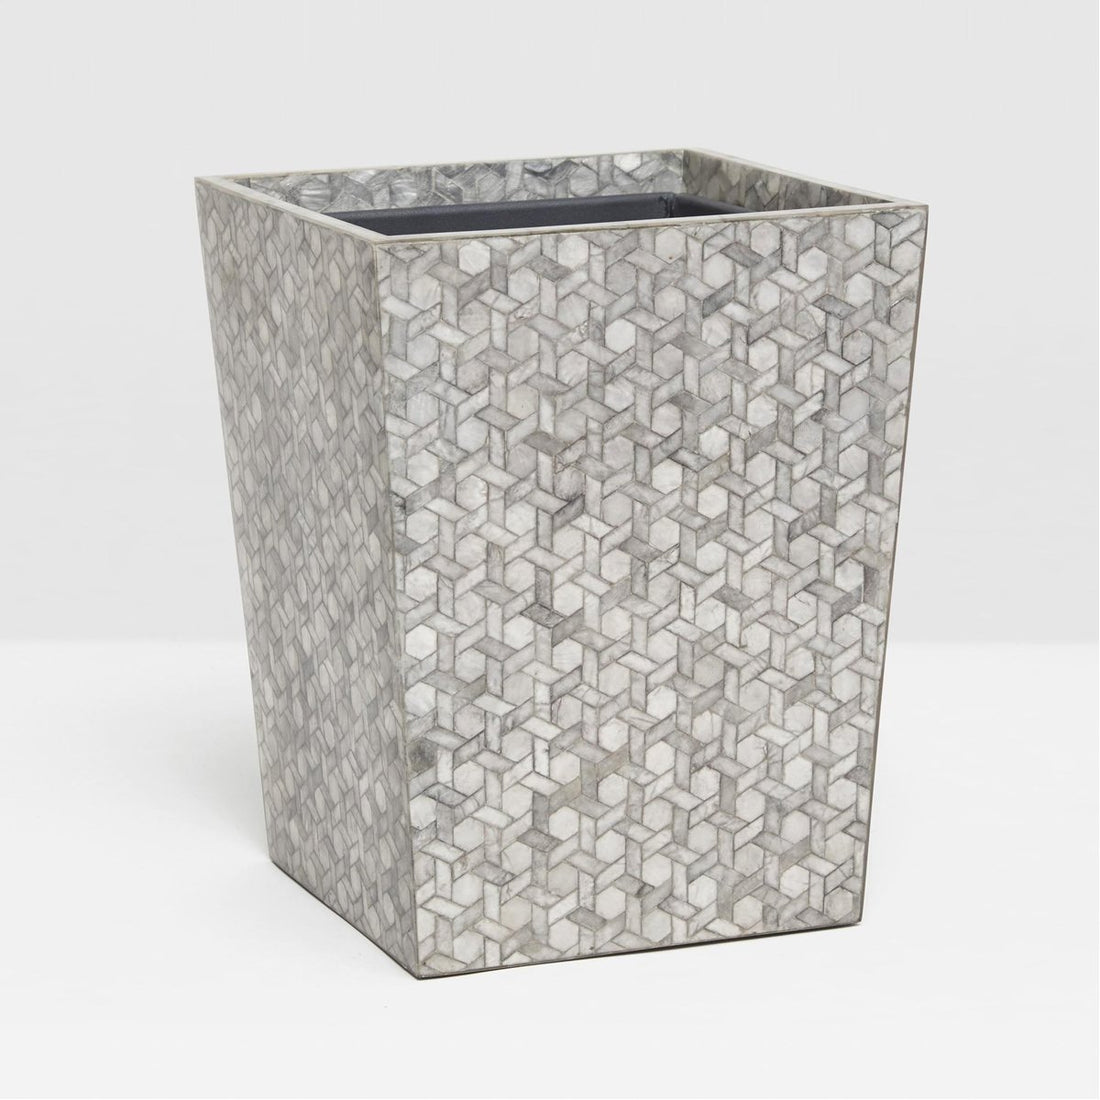 Pigeon and Poodle Melfi Square Wastebasket, Tapered